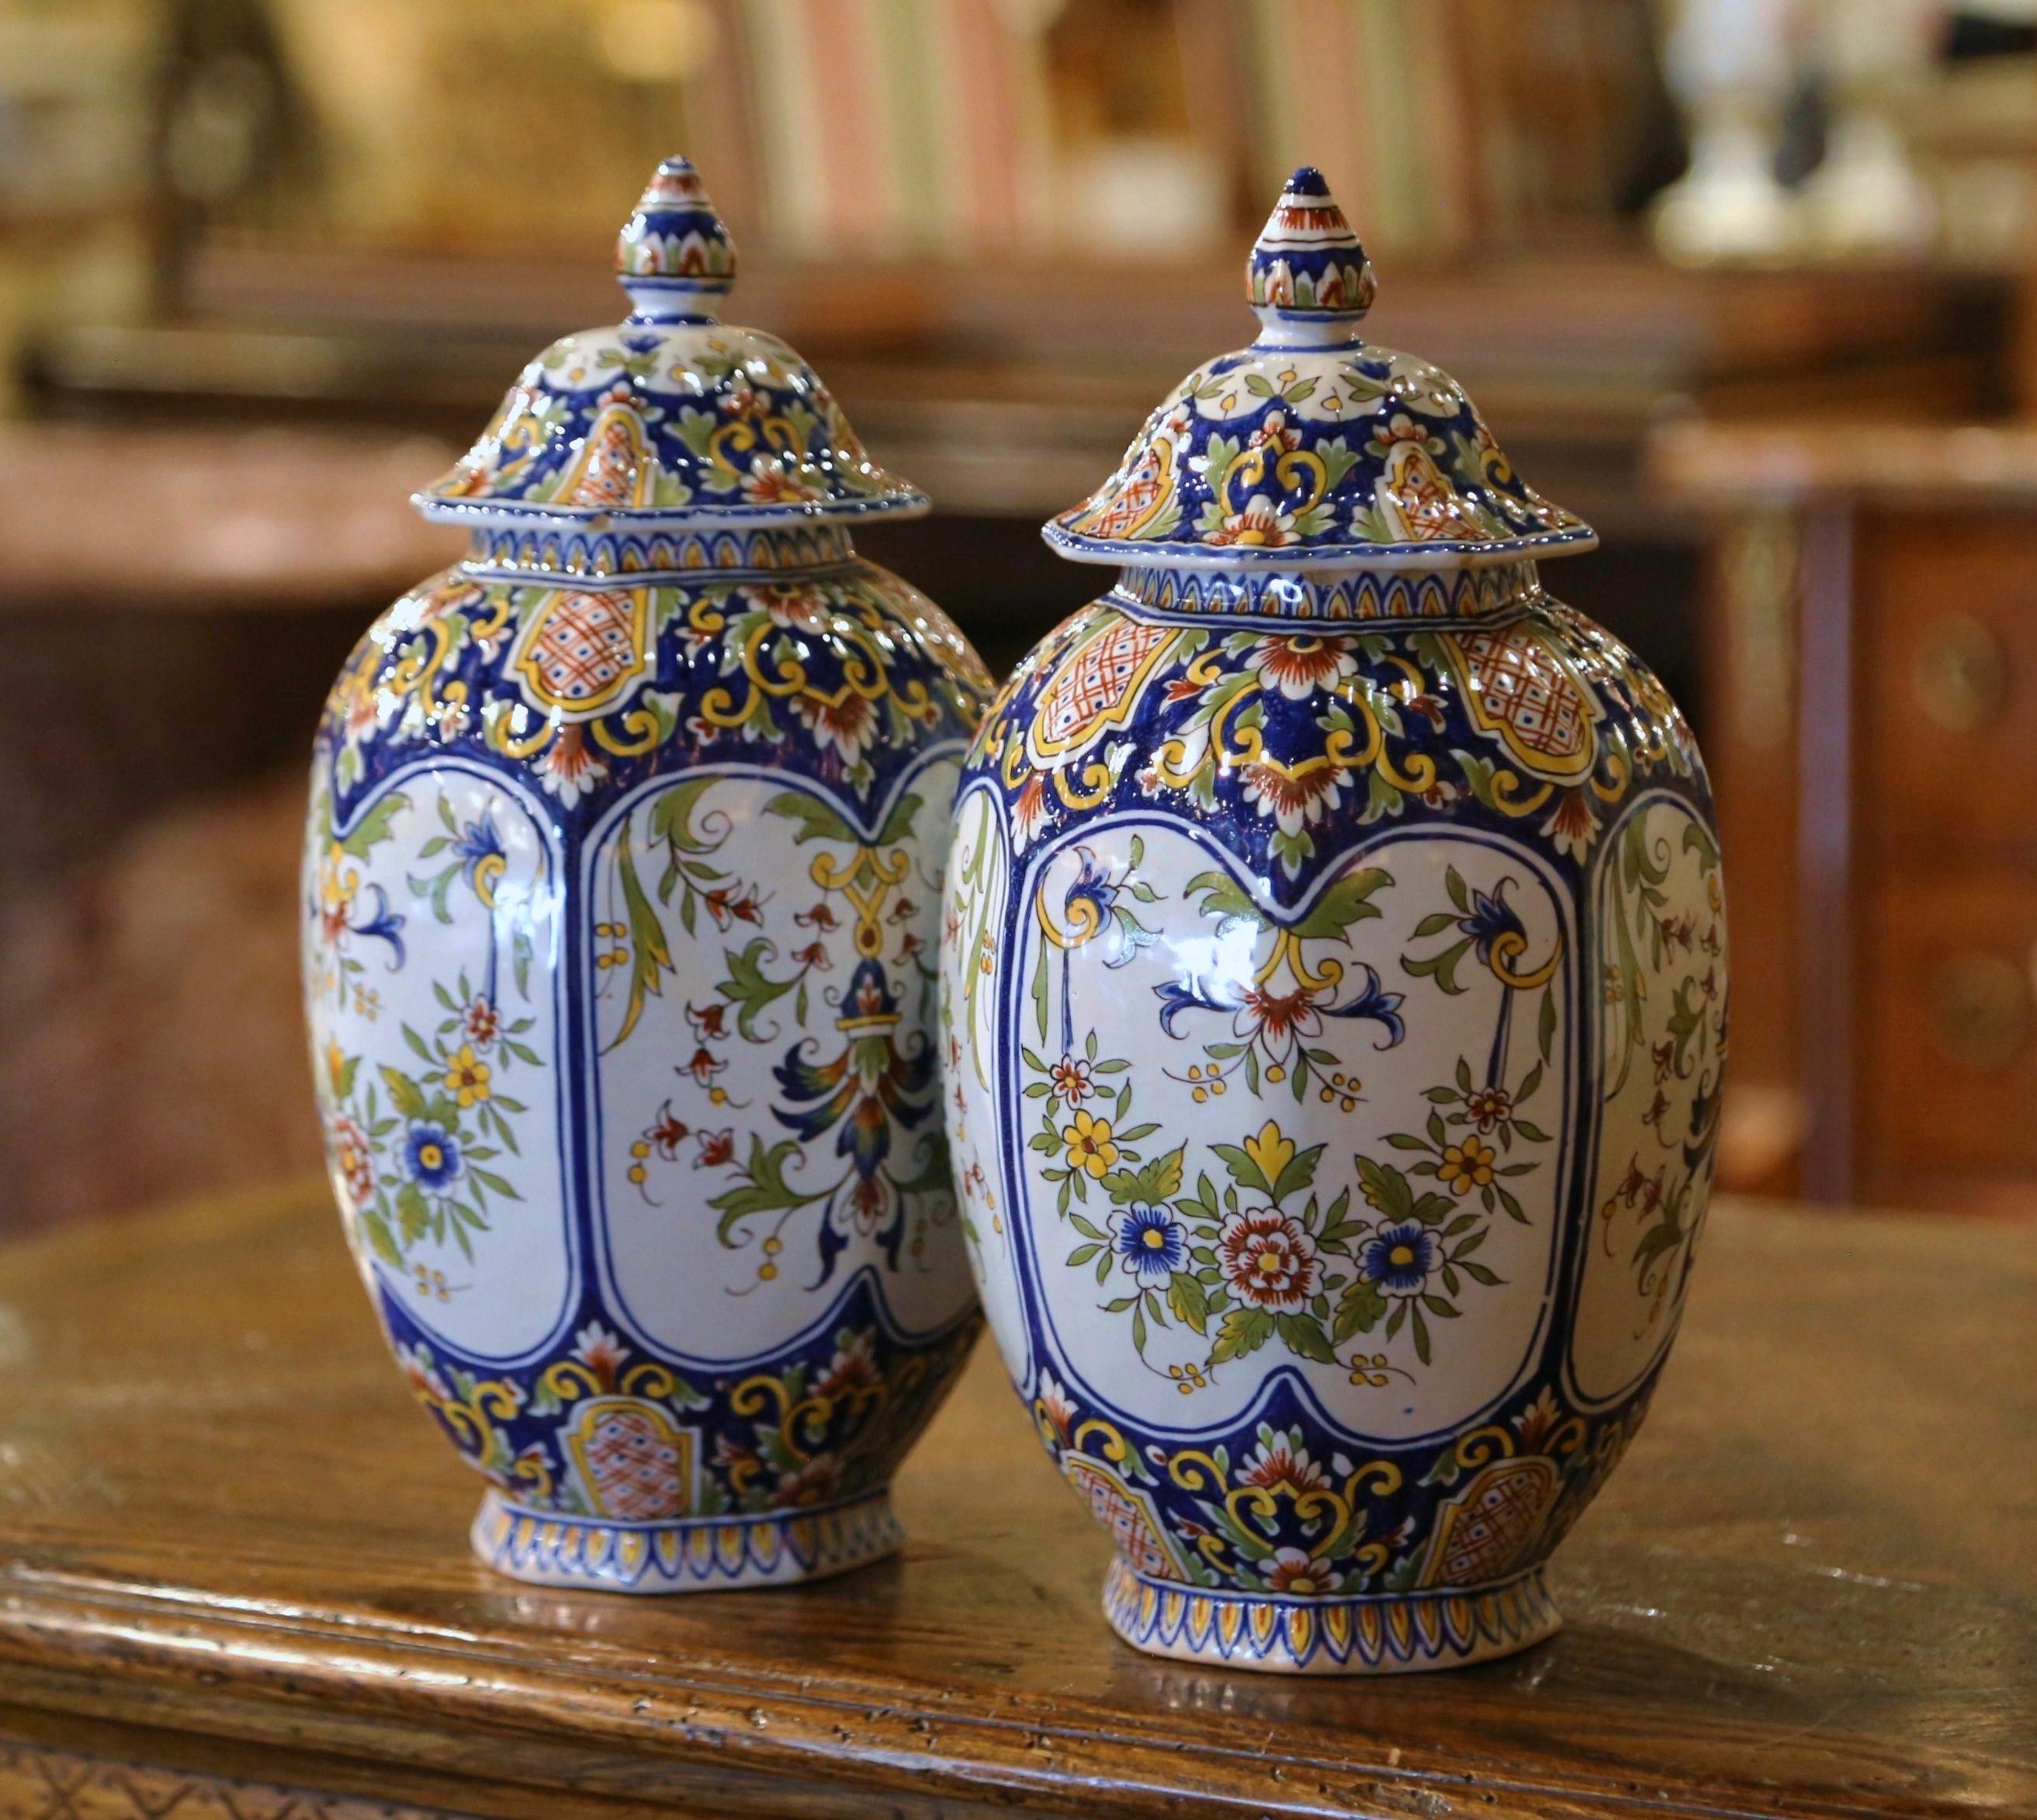 These elegant antique urns were crafted in Normandy, circa 1890. The round and colorful ceramic potiches are decorated with hand painted floral motifs in a traditional Rouen blue, white and yellow palette, including the four center medallions. The